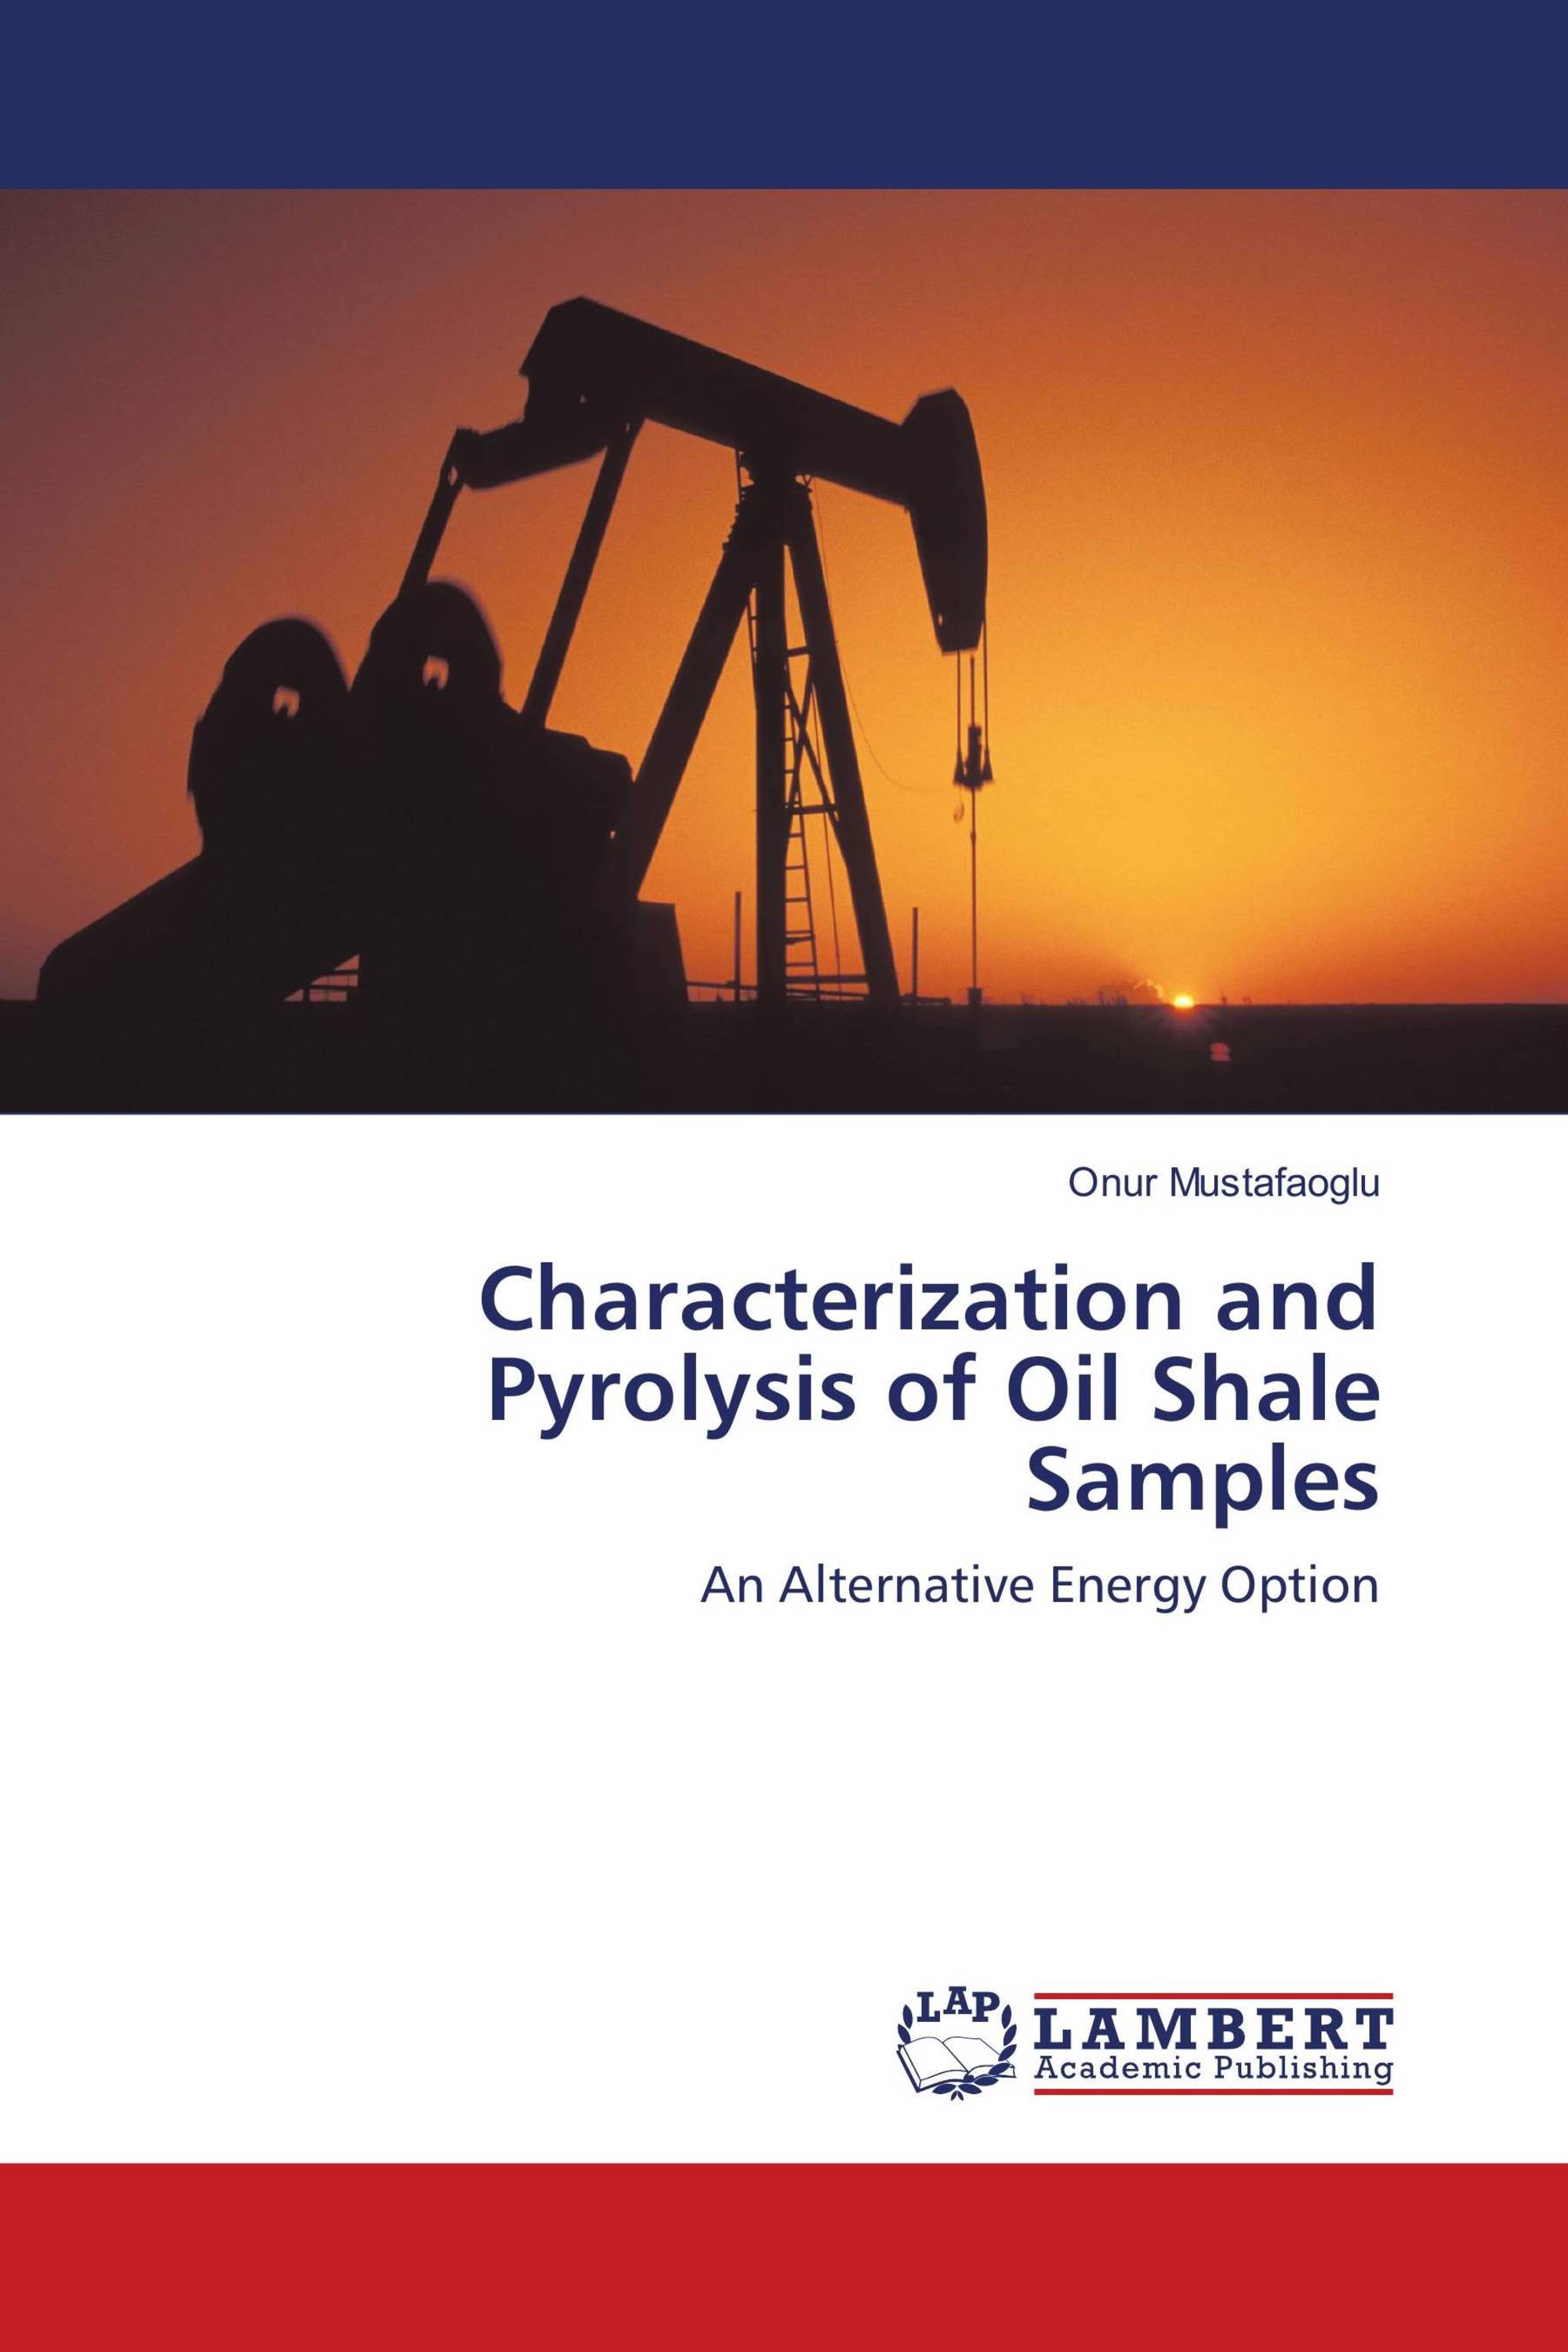 Characterization and Pyrolysis of Oil Shale Samples